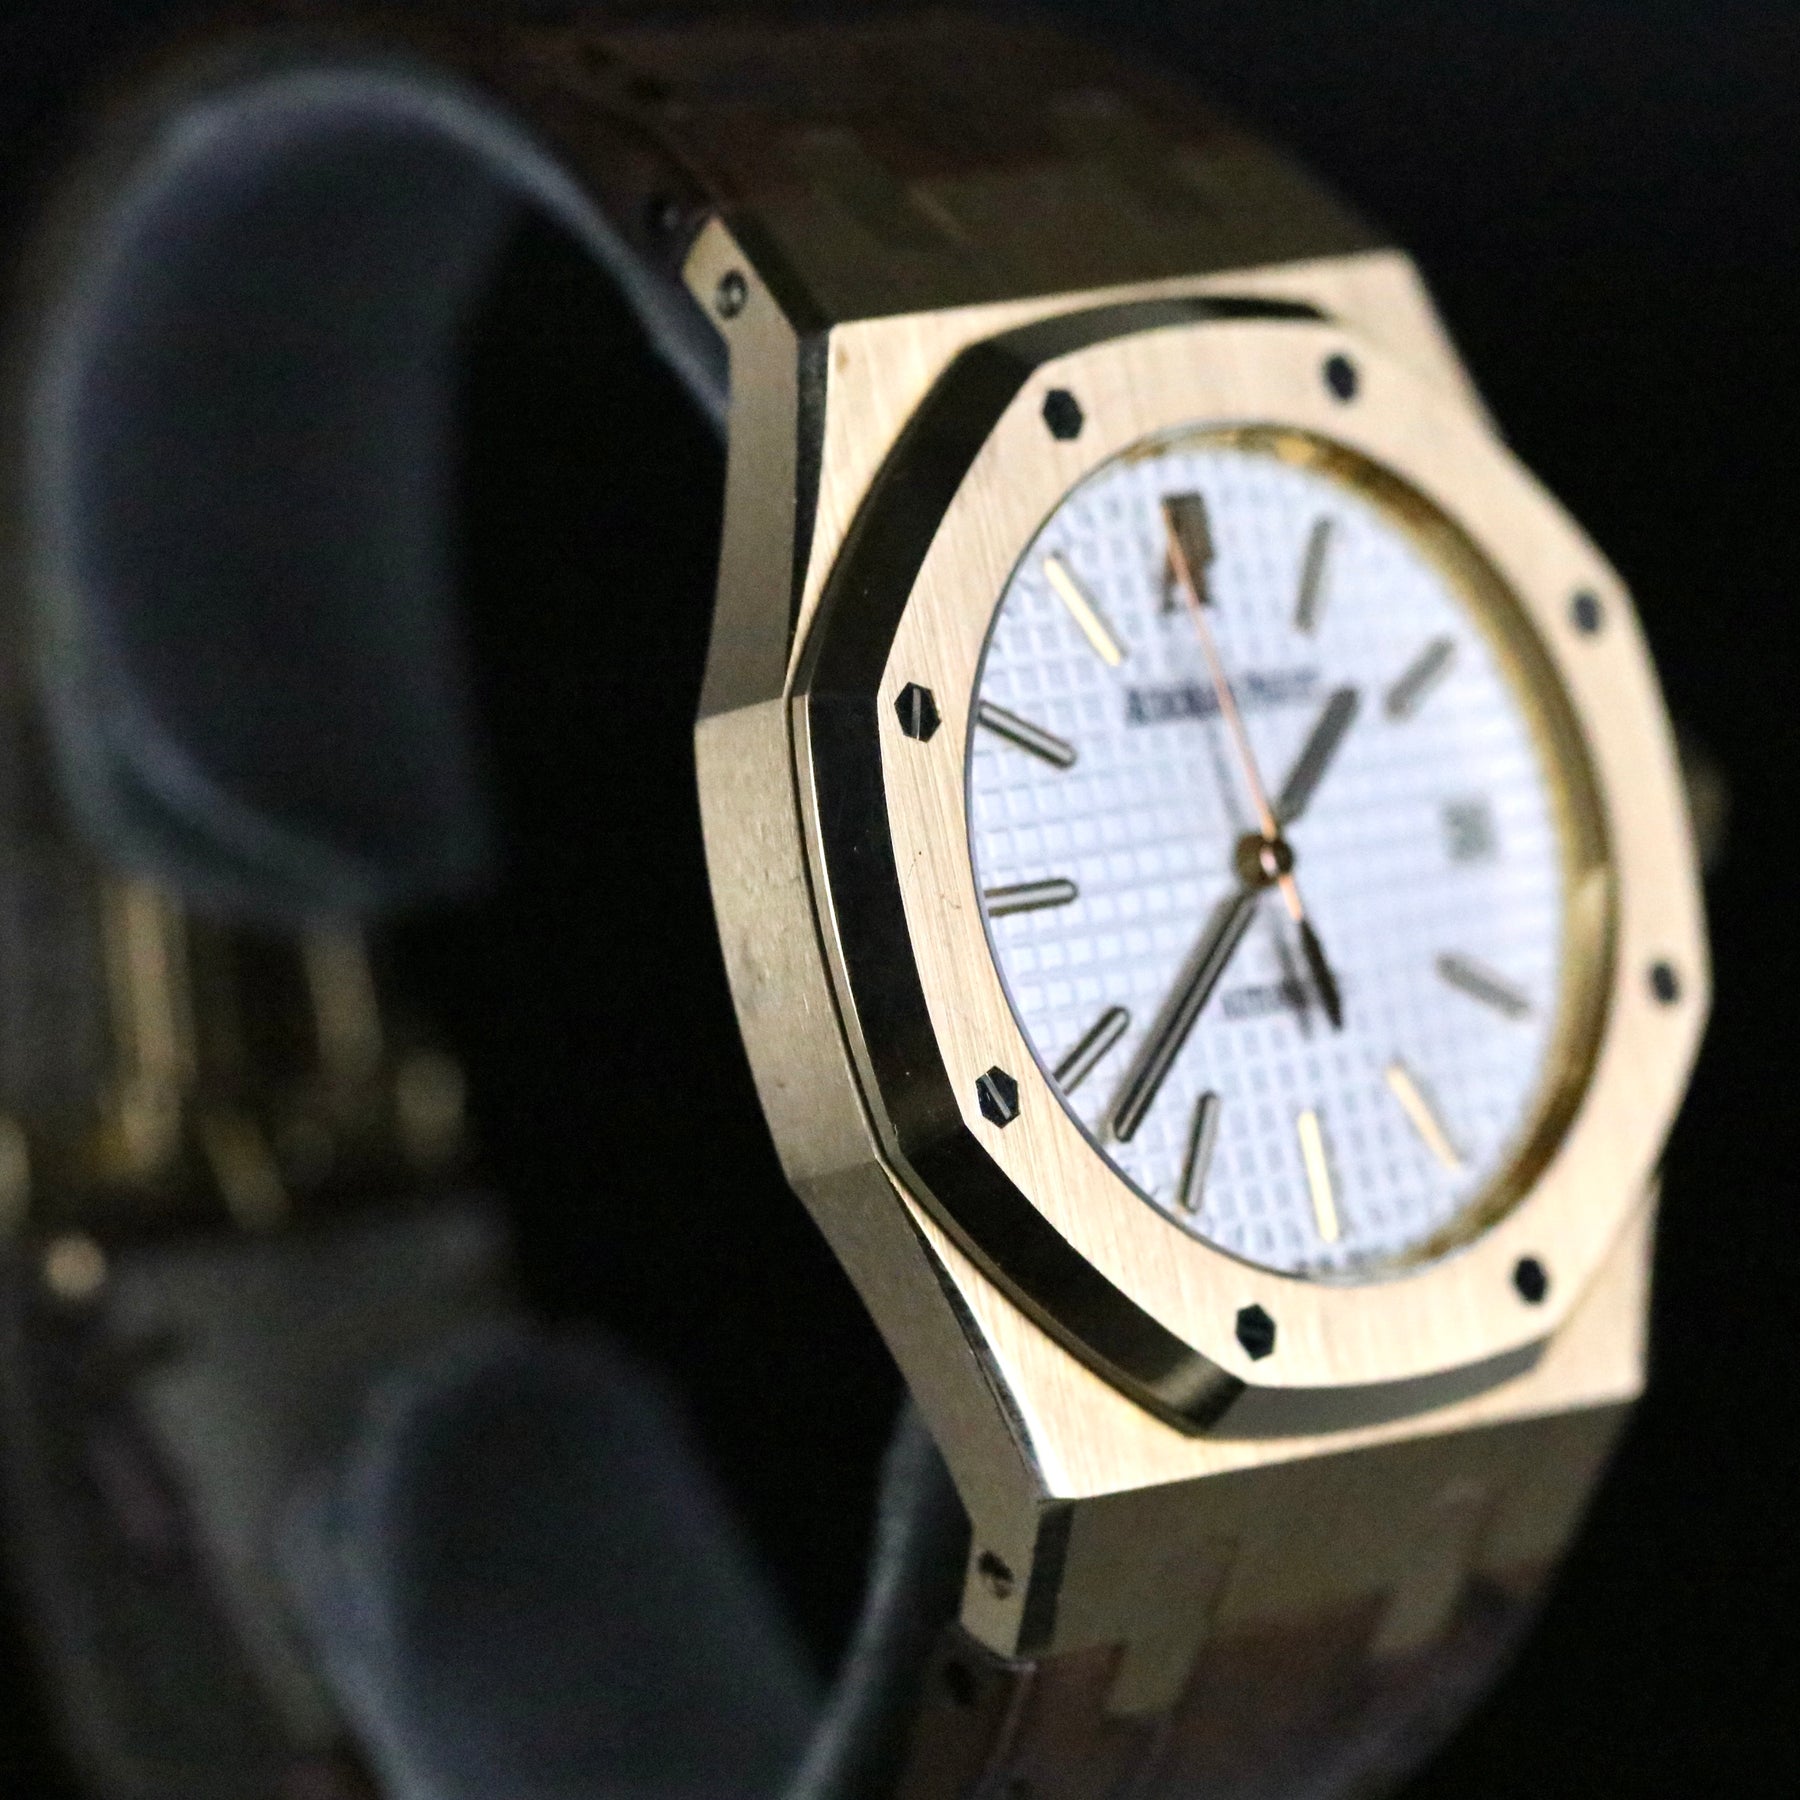 2008 Audemars Piguet 15300OR Royal Oak 39mm 18K Rose Gold with Box & Papers